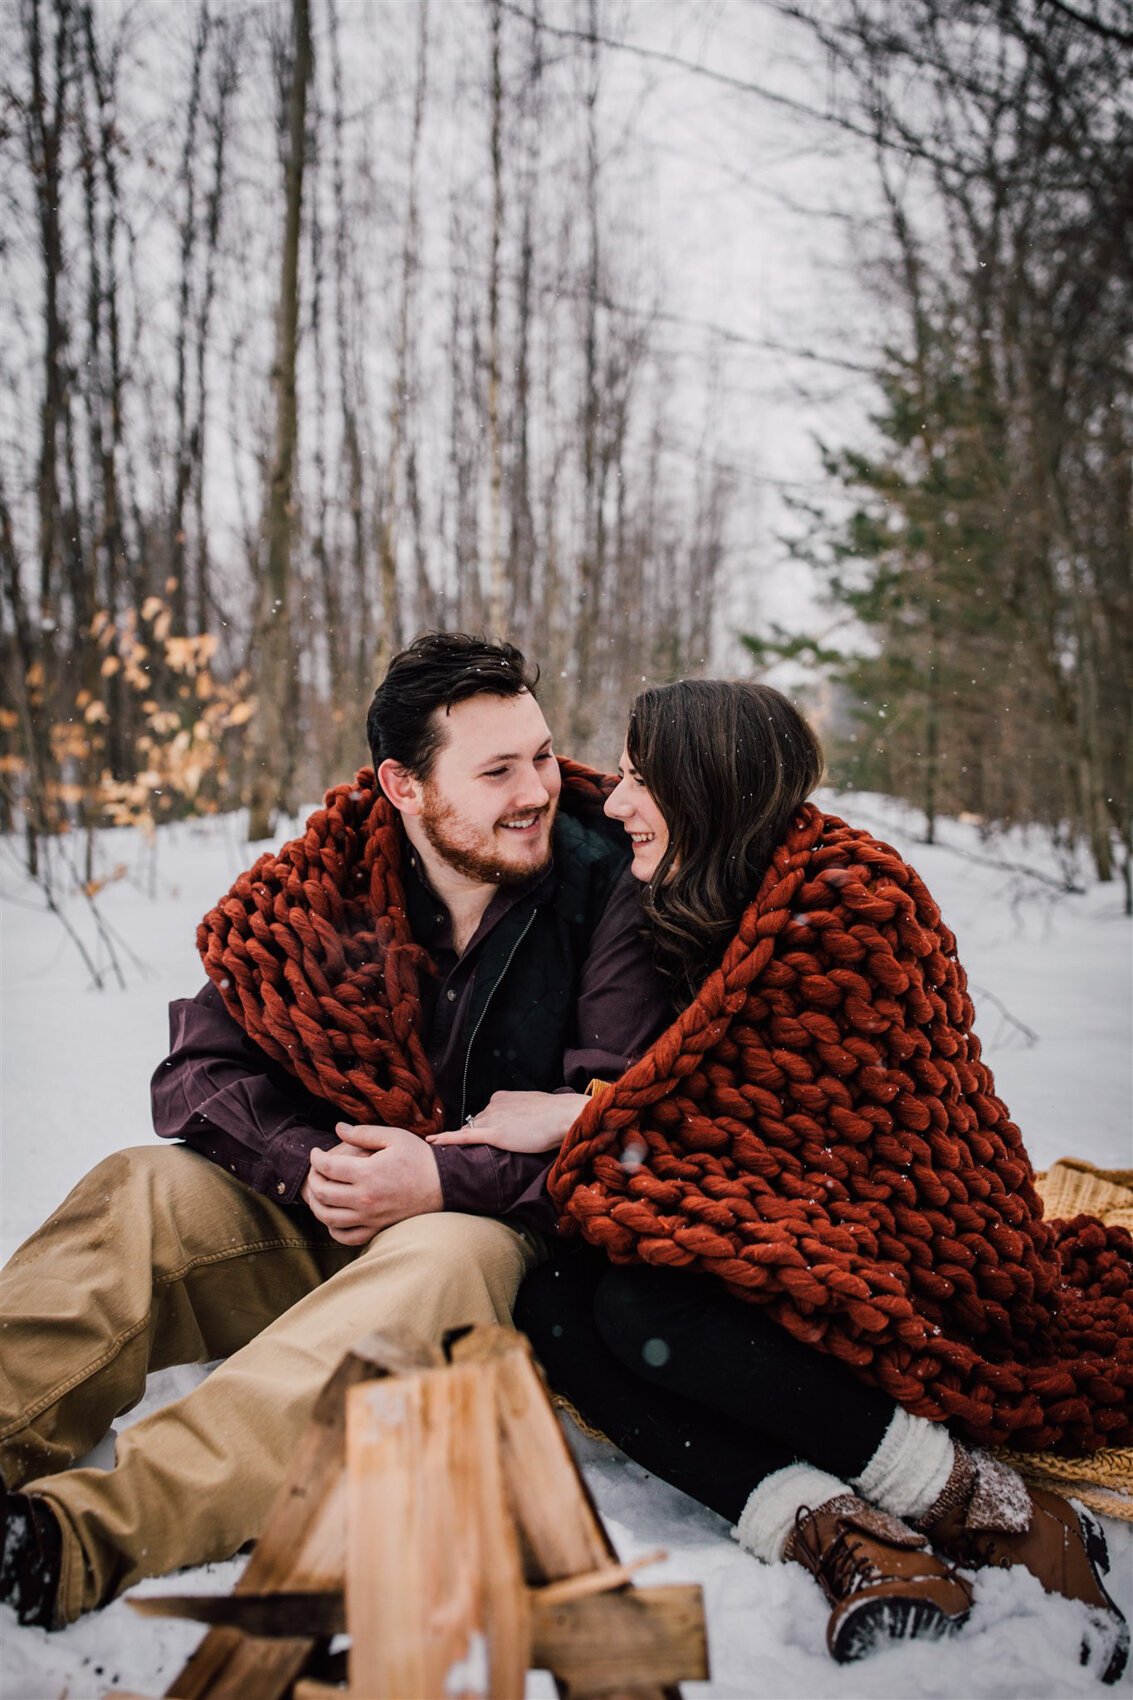 Carlie-and-Joe-Engagement-Pictures-Winter-2020-8.jpg